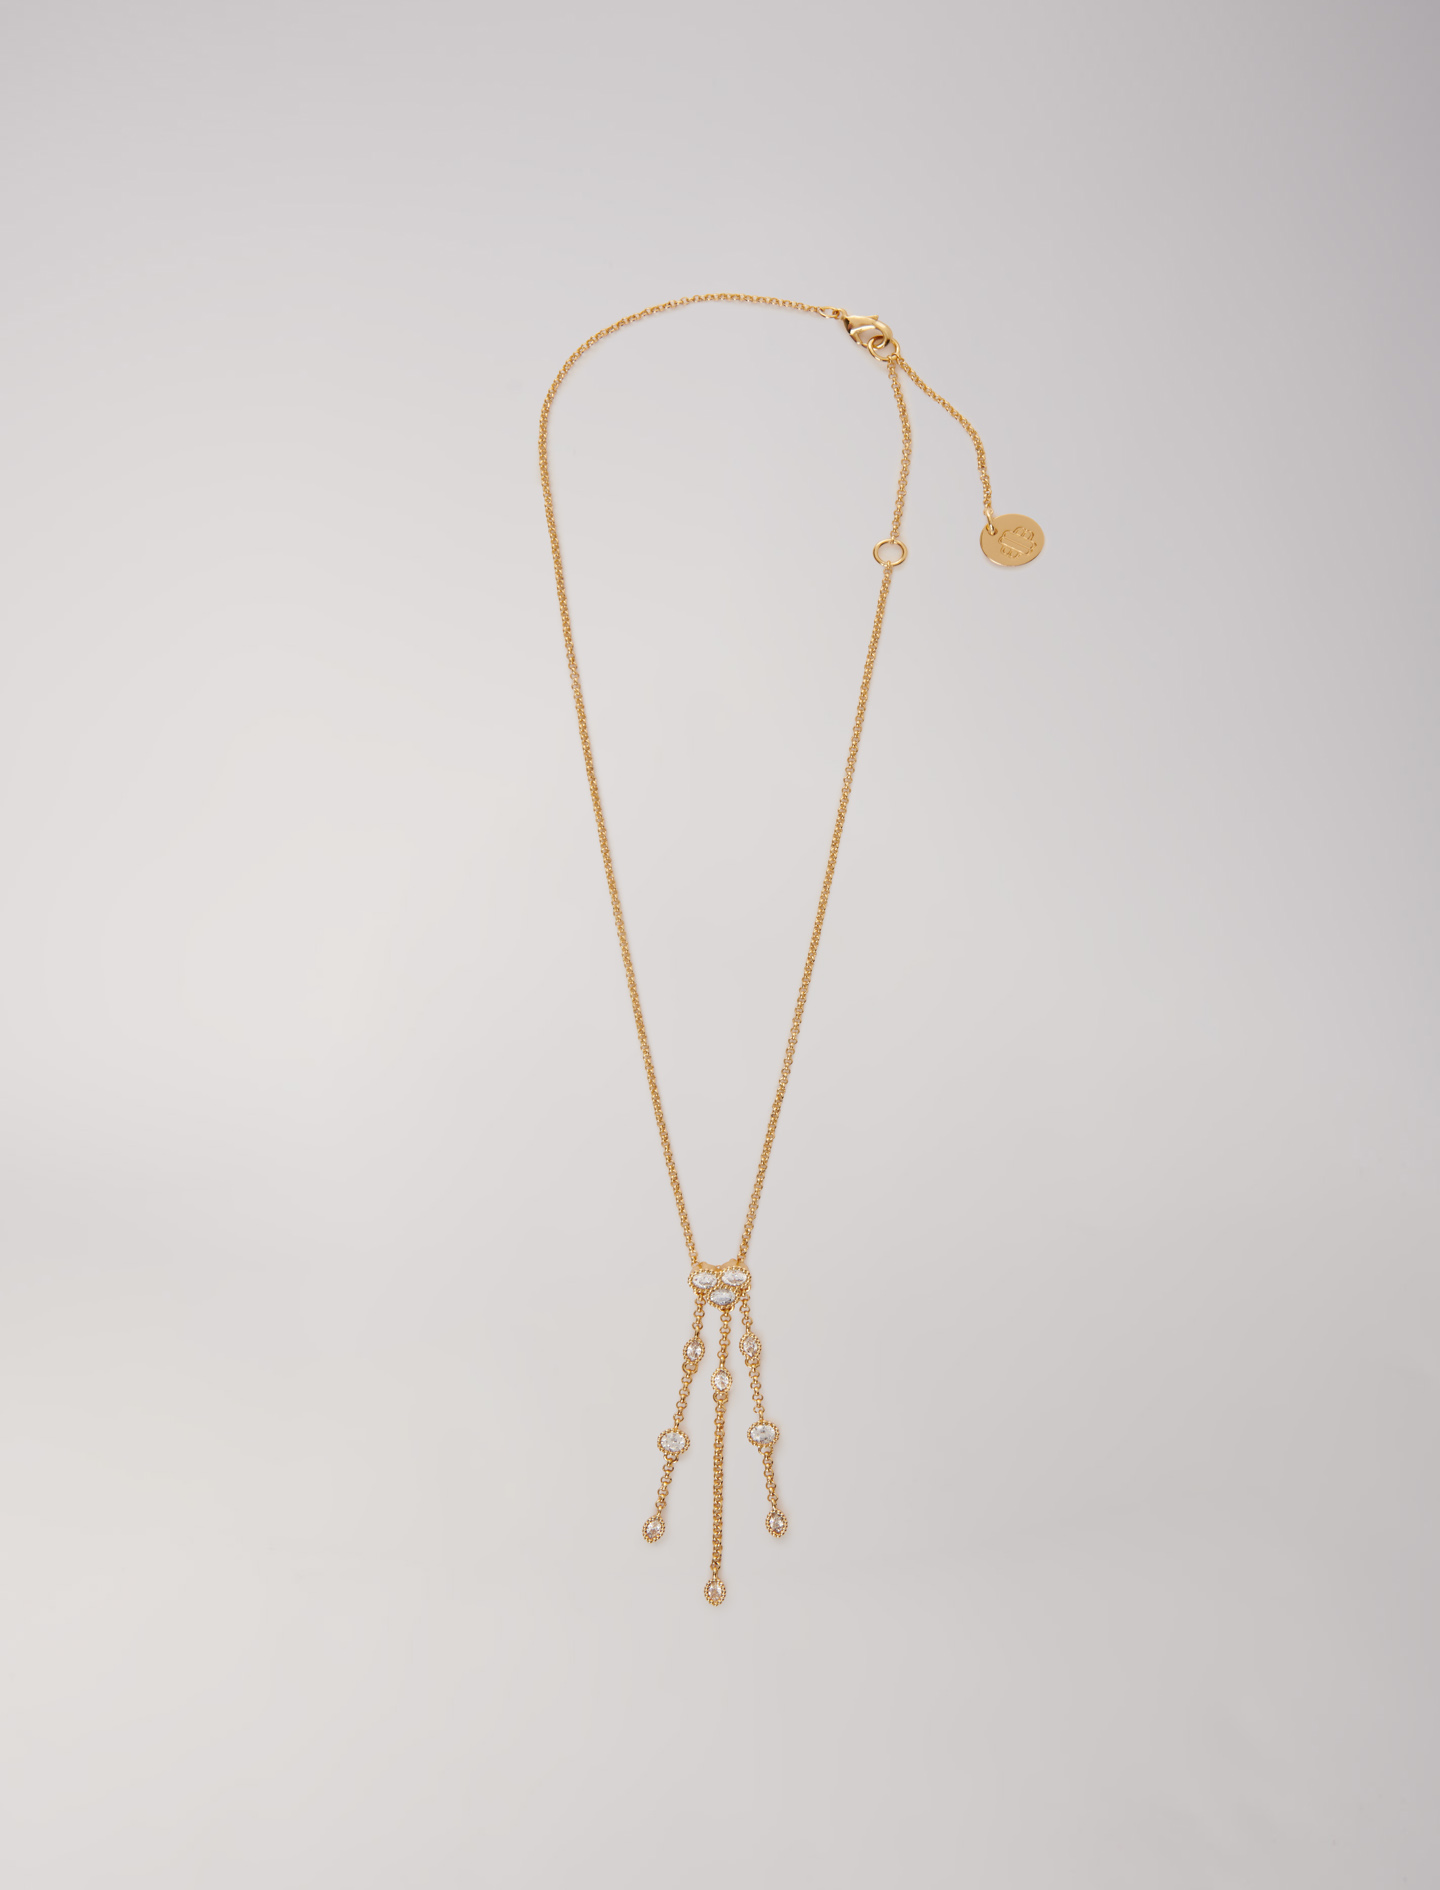 Maje Woman's zirconium oxide Jewellery: Gold necklace for Fall/Winter, in color Gold / Yellow